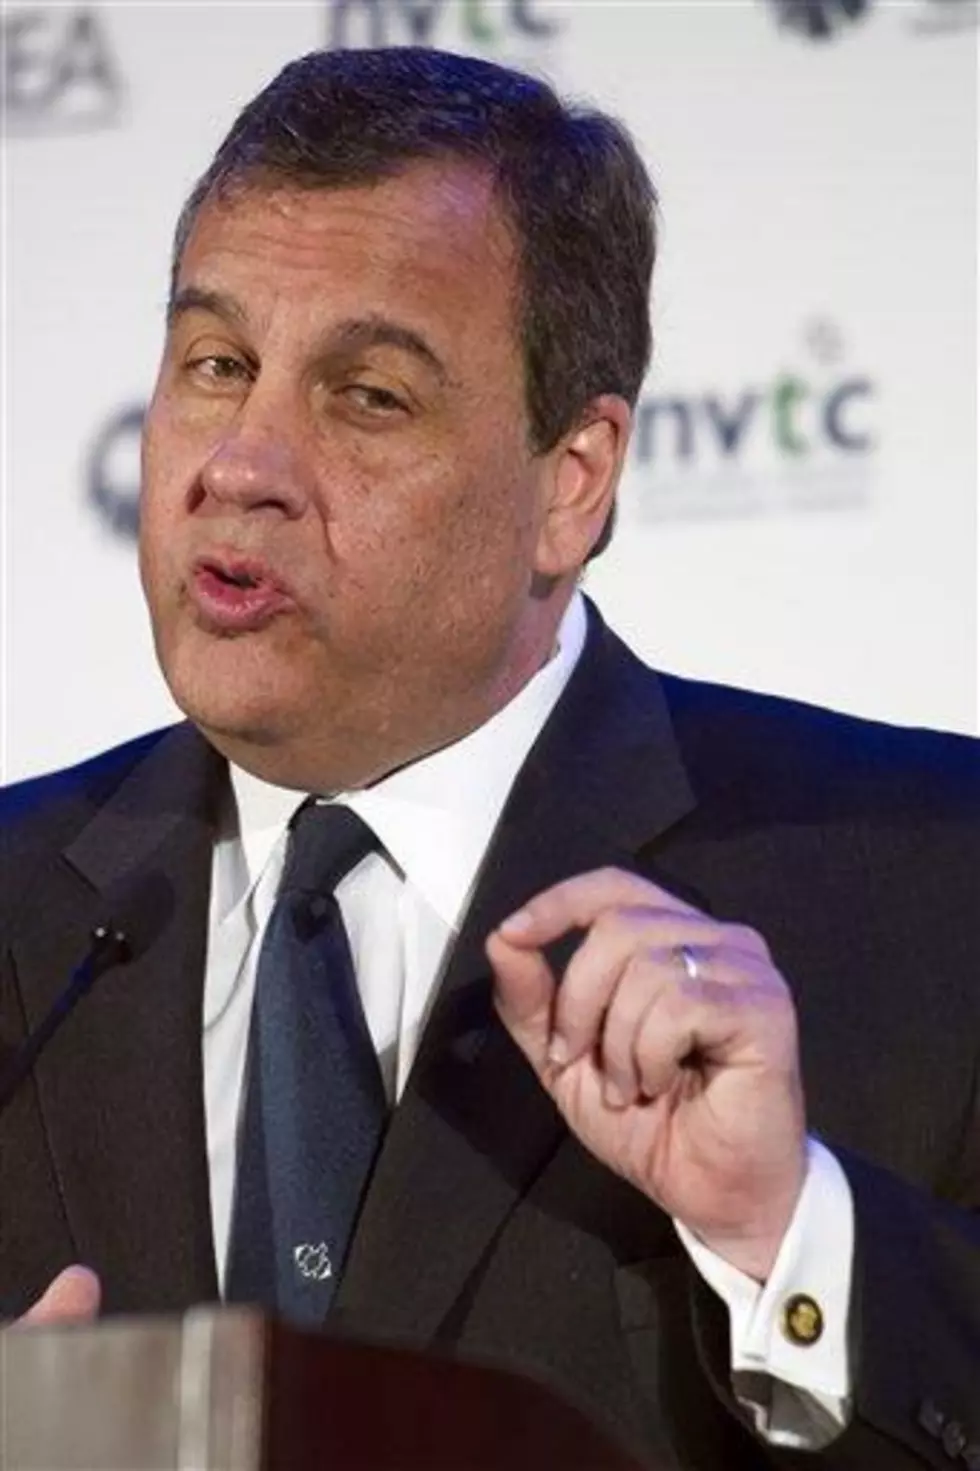 Reaction from Christie, lawmakers, Port Authority on Bridgegate charges